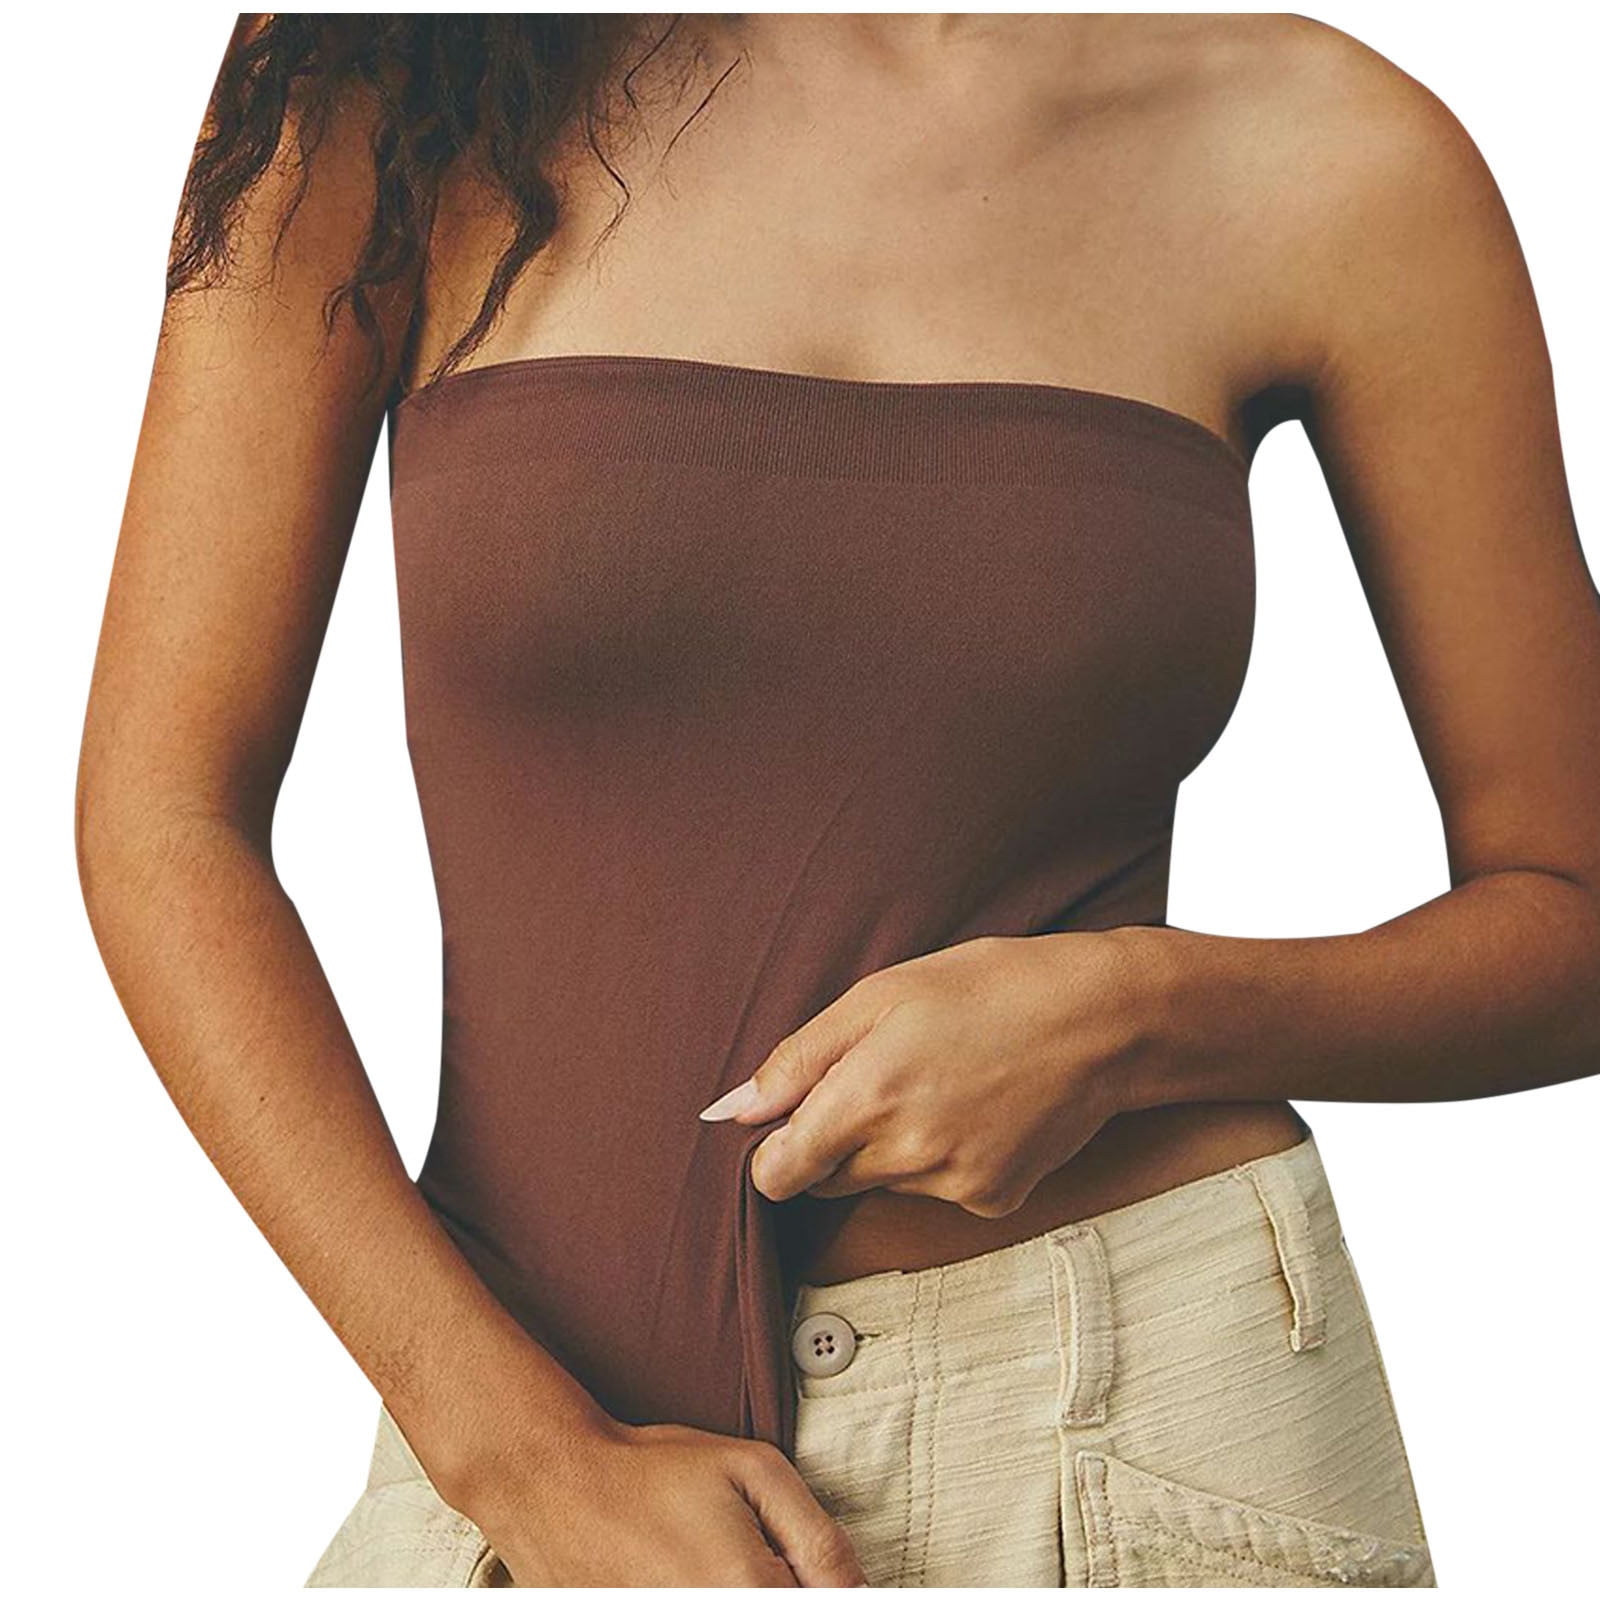 Such a cute tube top for summer! It would be cute styled with a jacket, tube  top